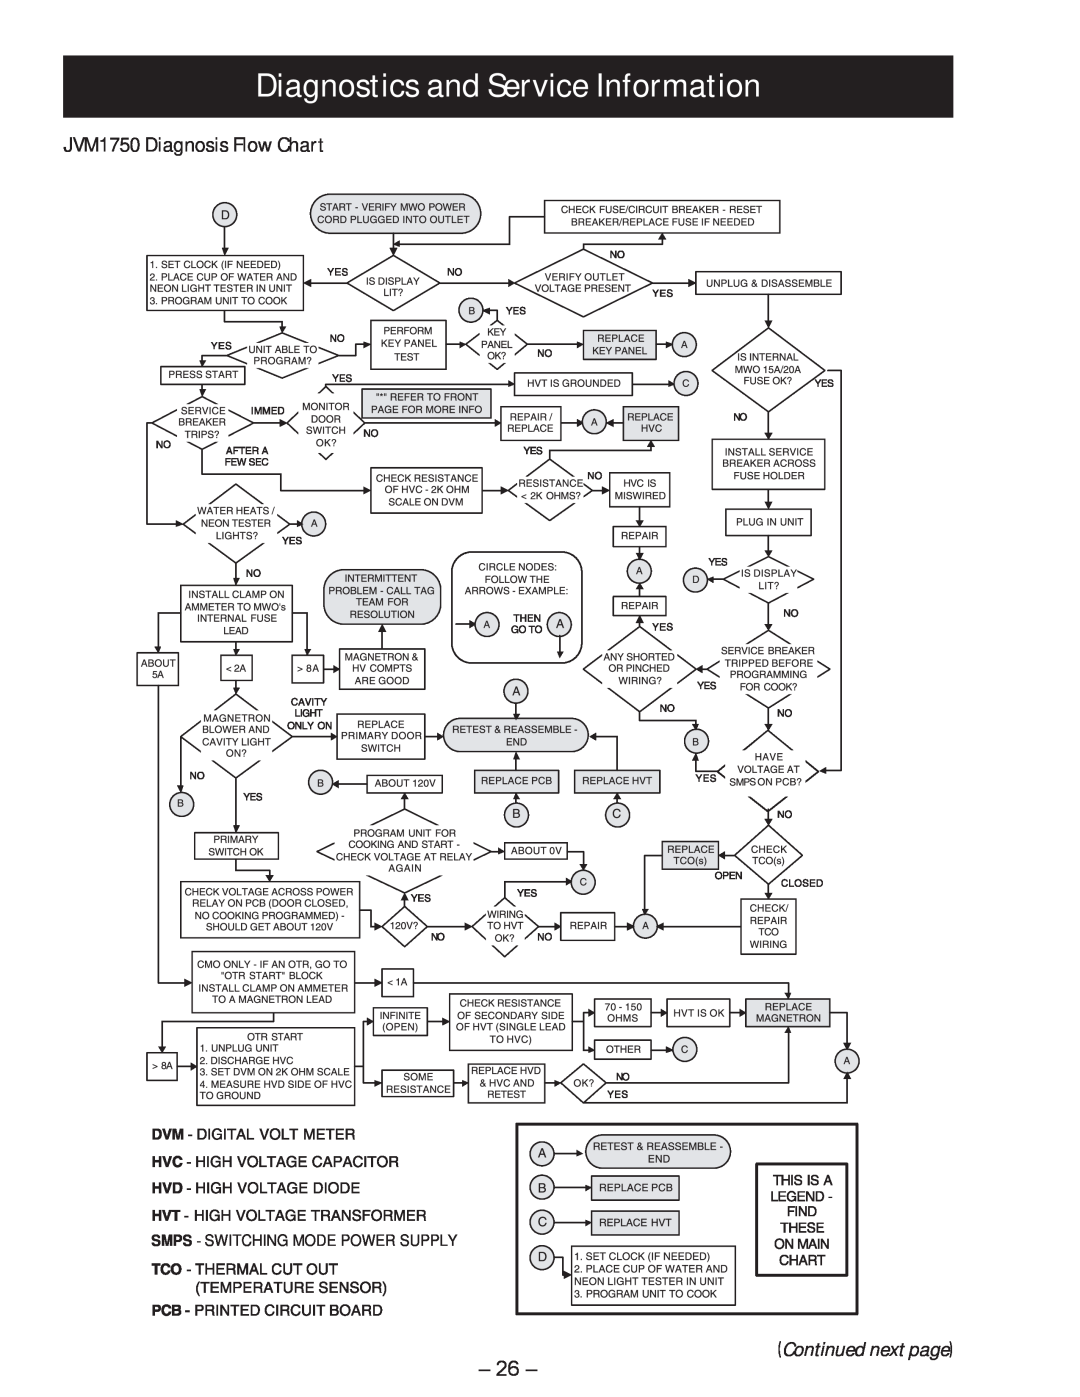 GE manual Diagnostics and Service Information, JVM1750 Diagnosis Flow Chart, Continued next page 